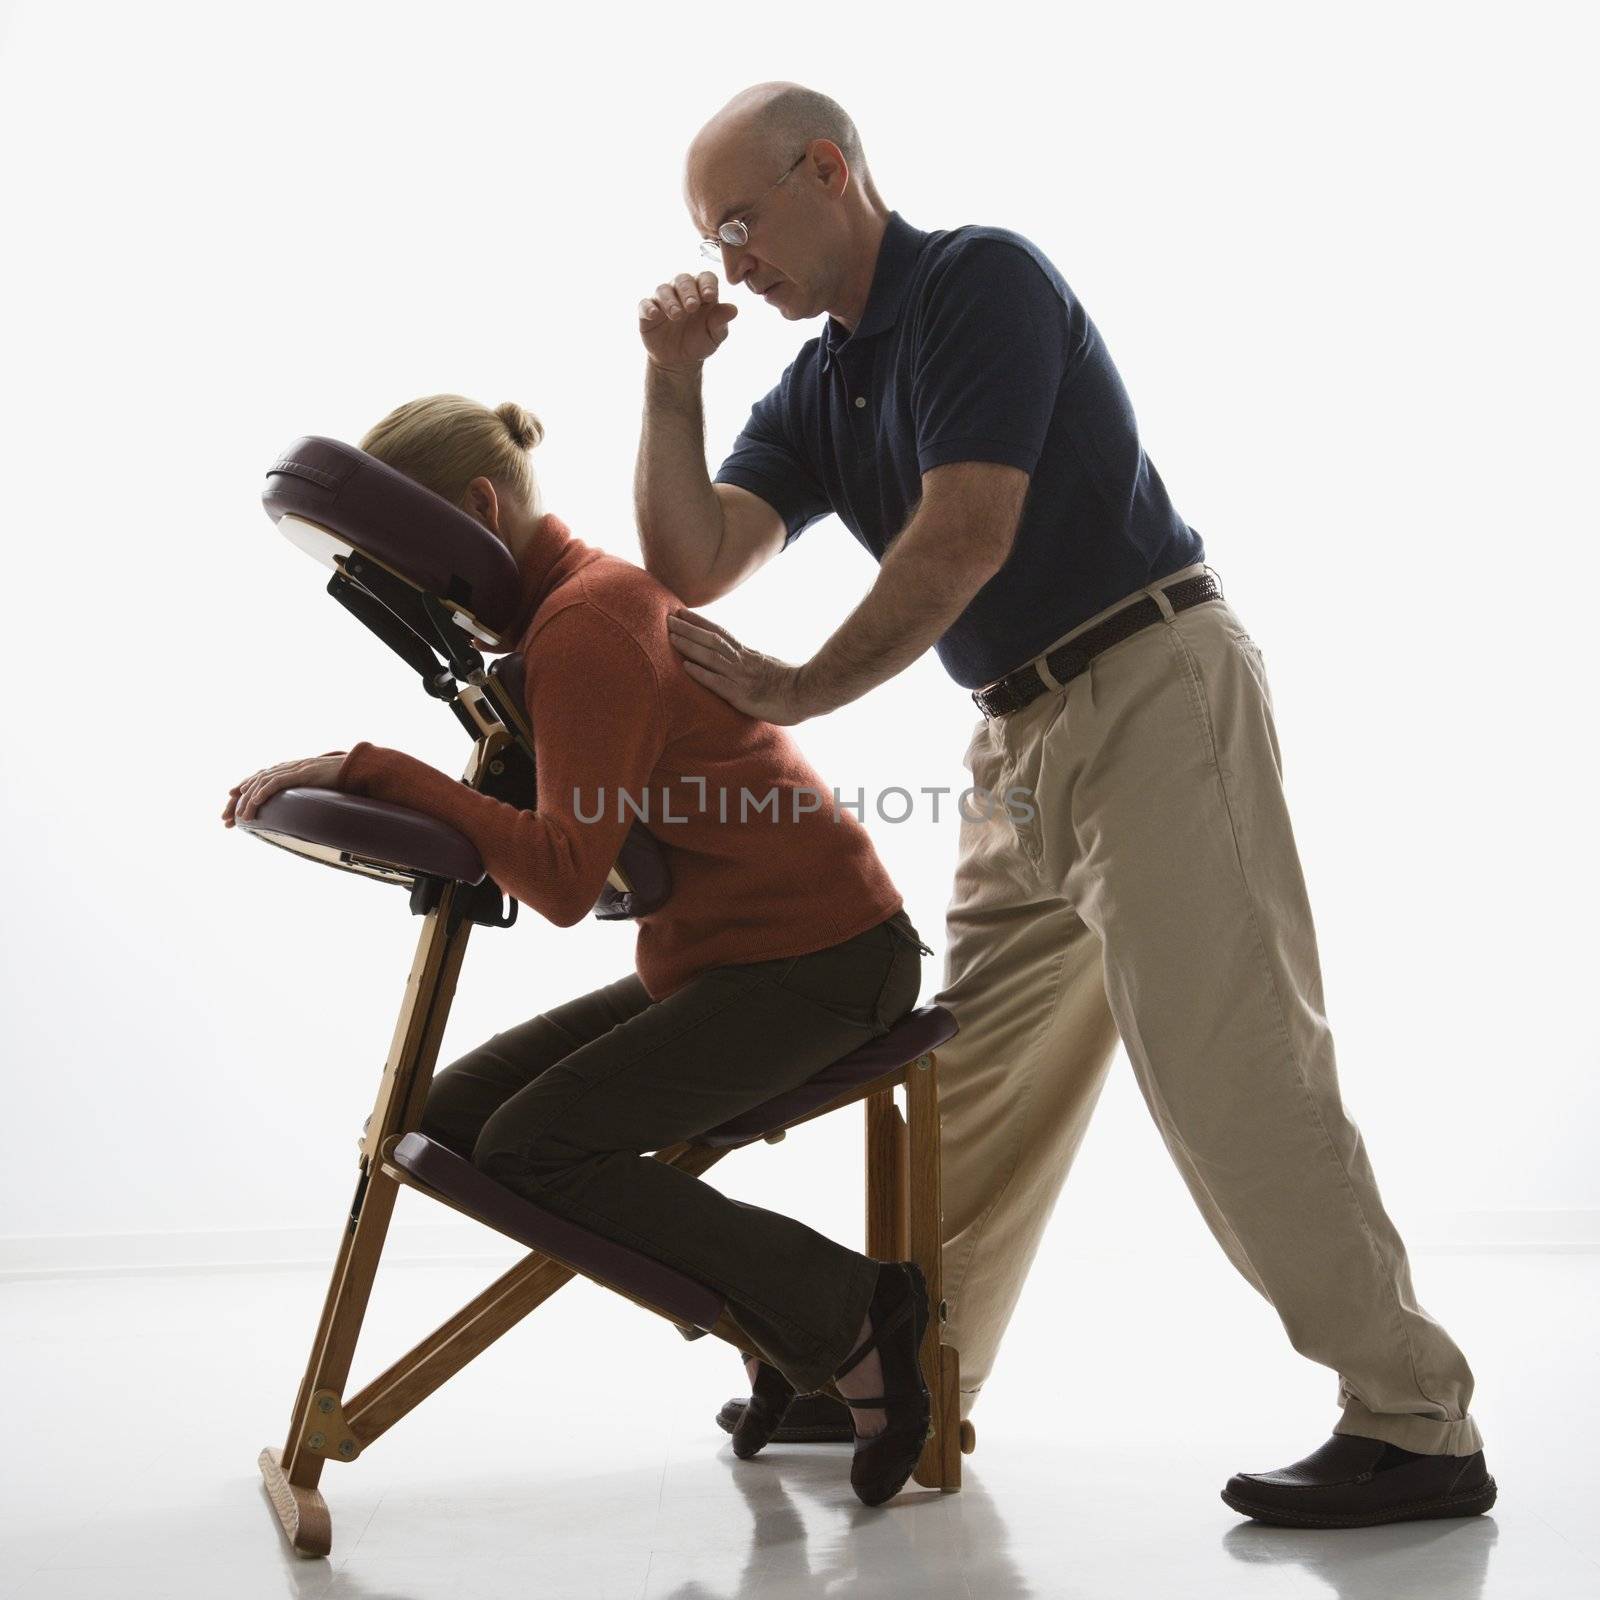 Caucasian middle-aged male massage therapist massaging back of Caucasian middle-aged woman sitting in massage chair with his elbow.